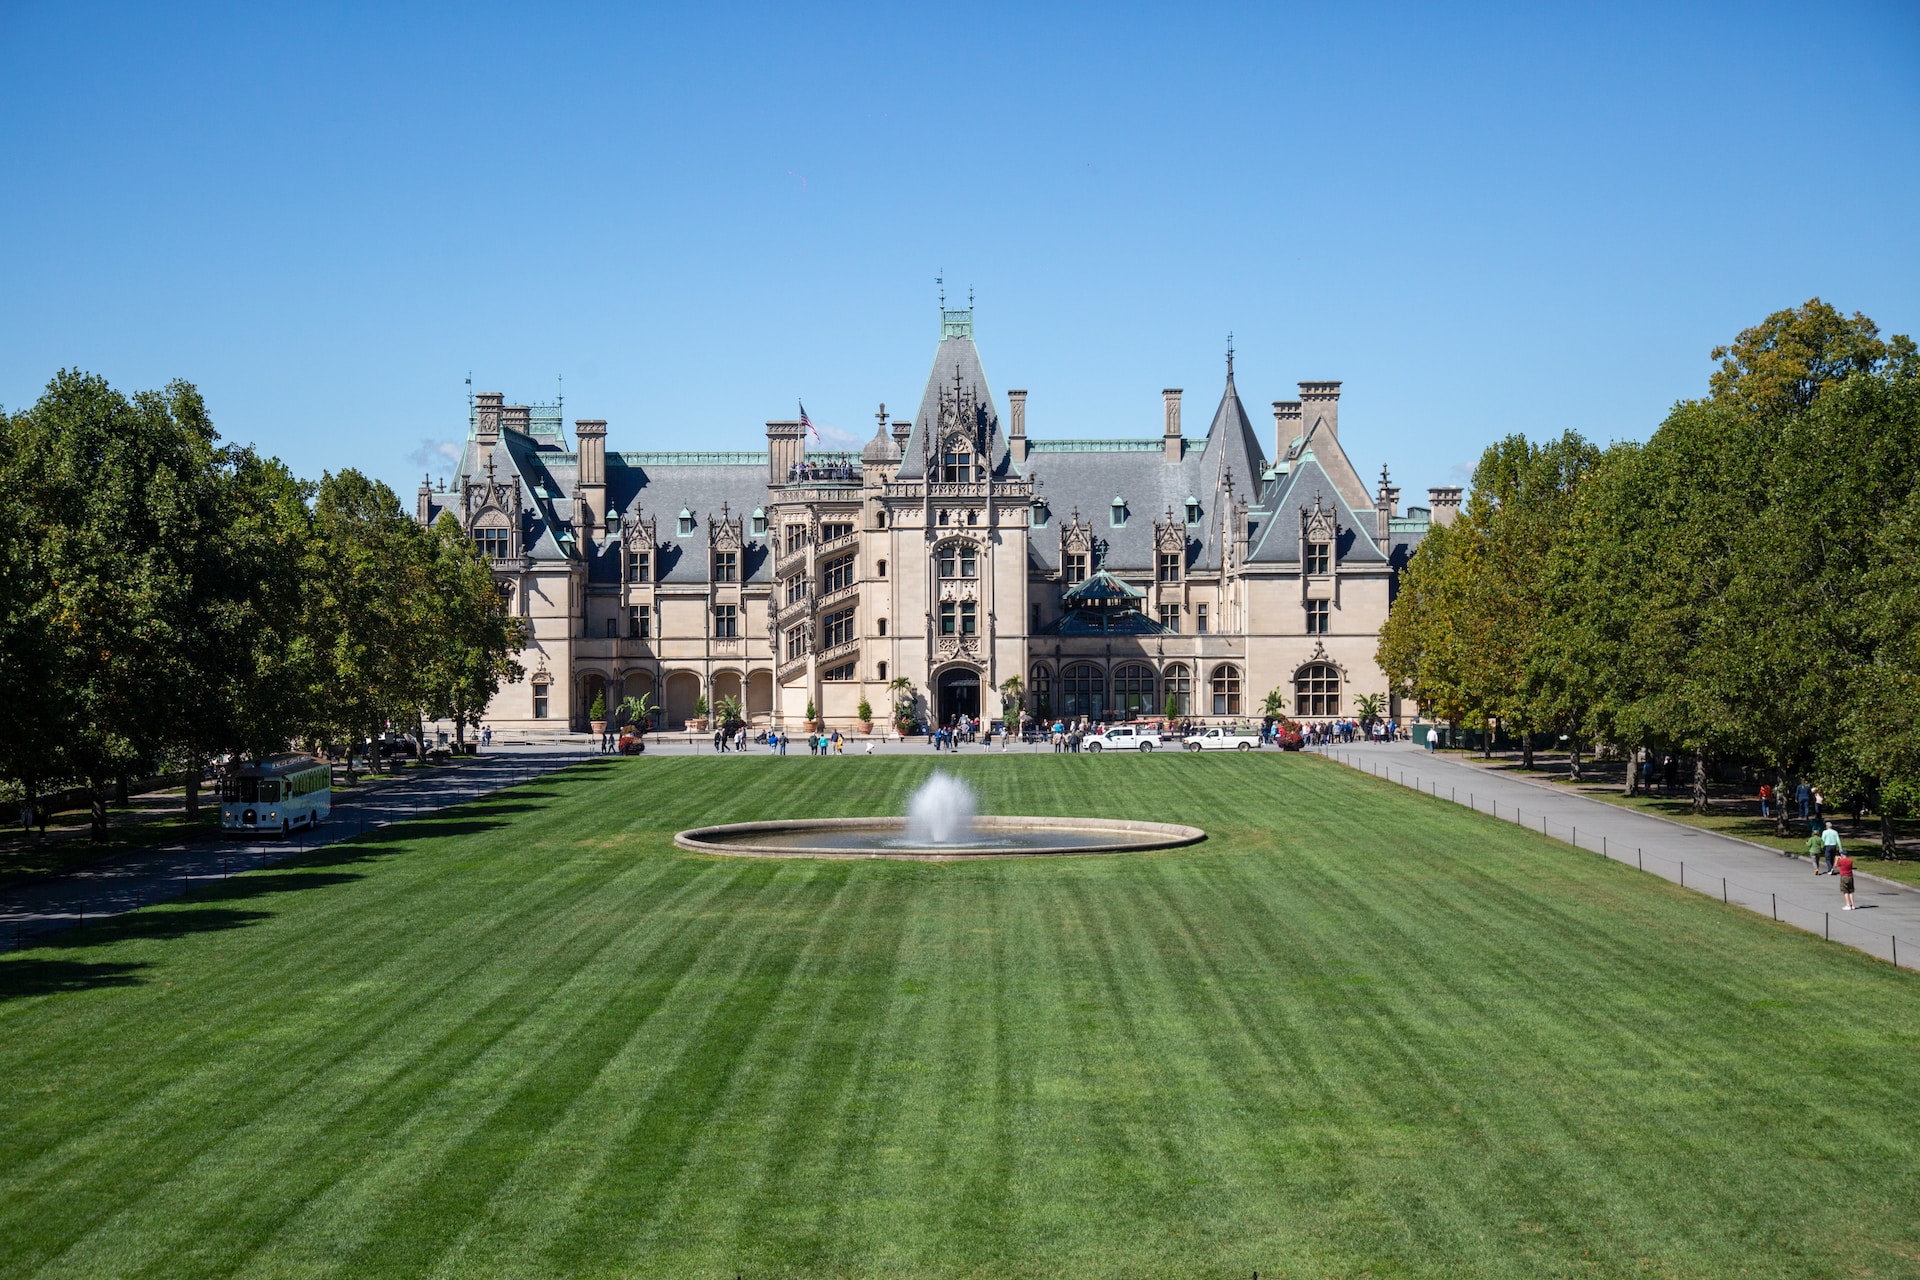 The wide manicured lawn of the Biltmore Estate in Asheville.